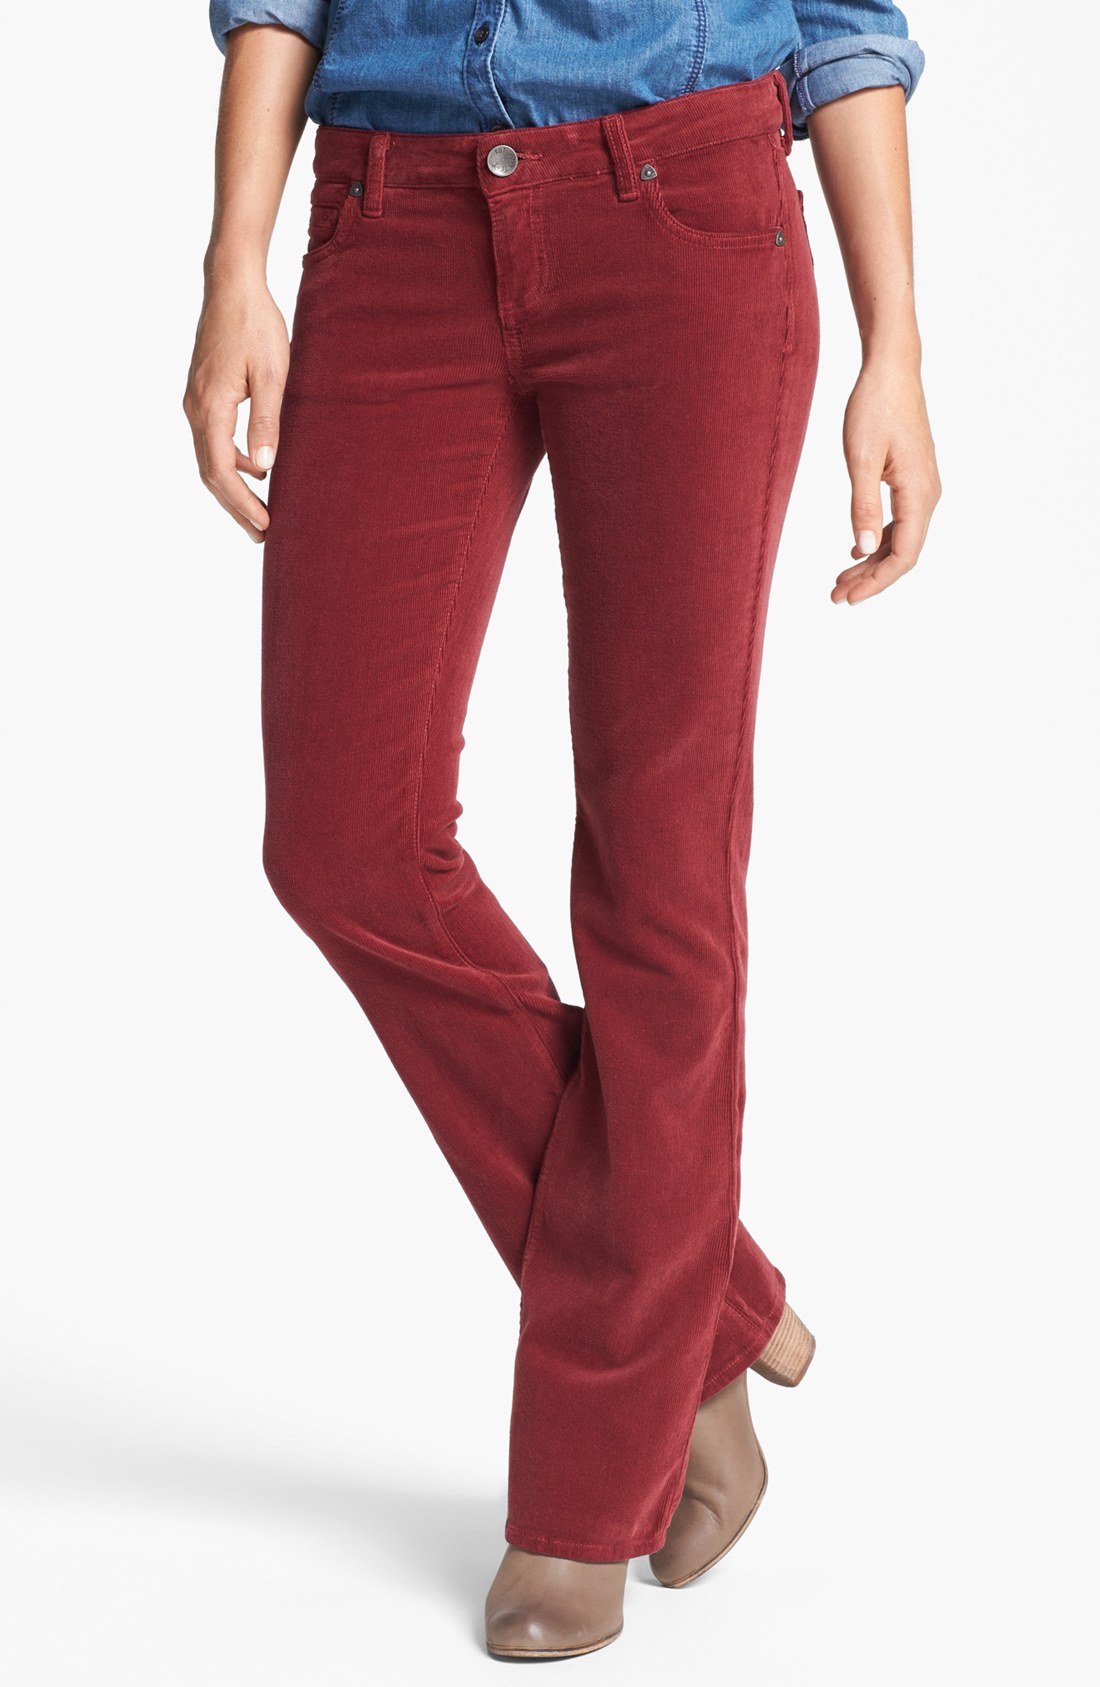 Kut From The Kloth Baby Bootcut Corduroy Jeans in Red (Red Cordova) | Lyst